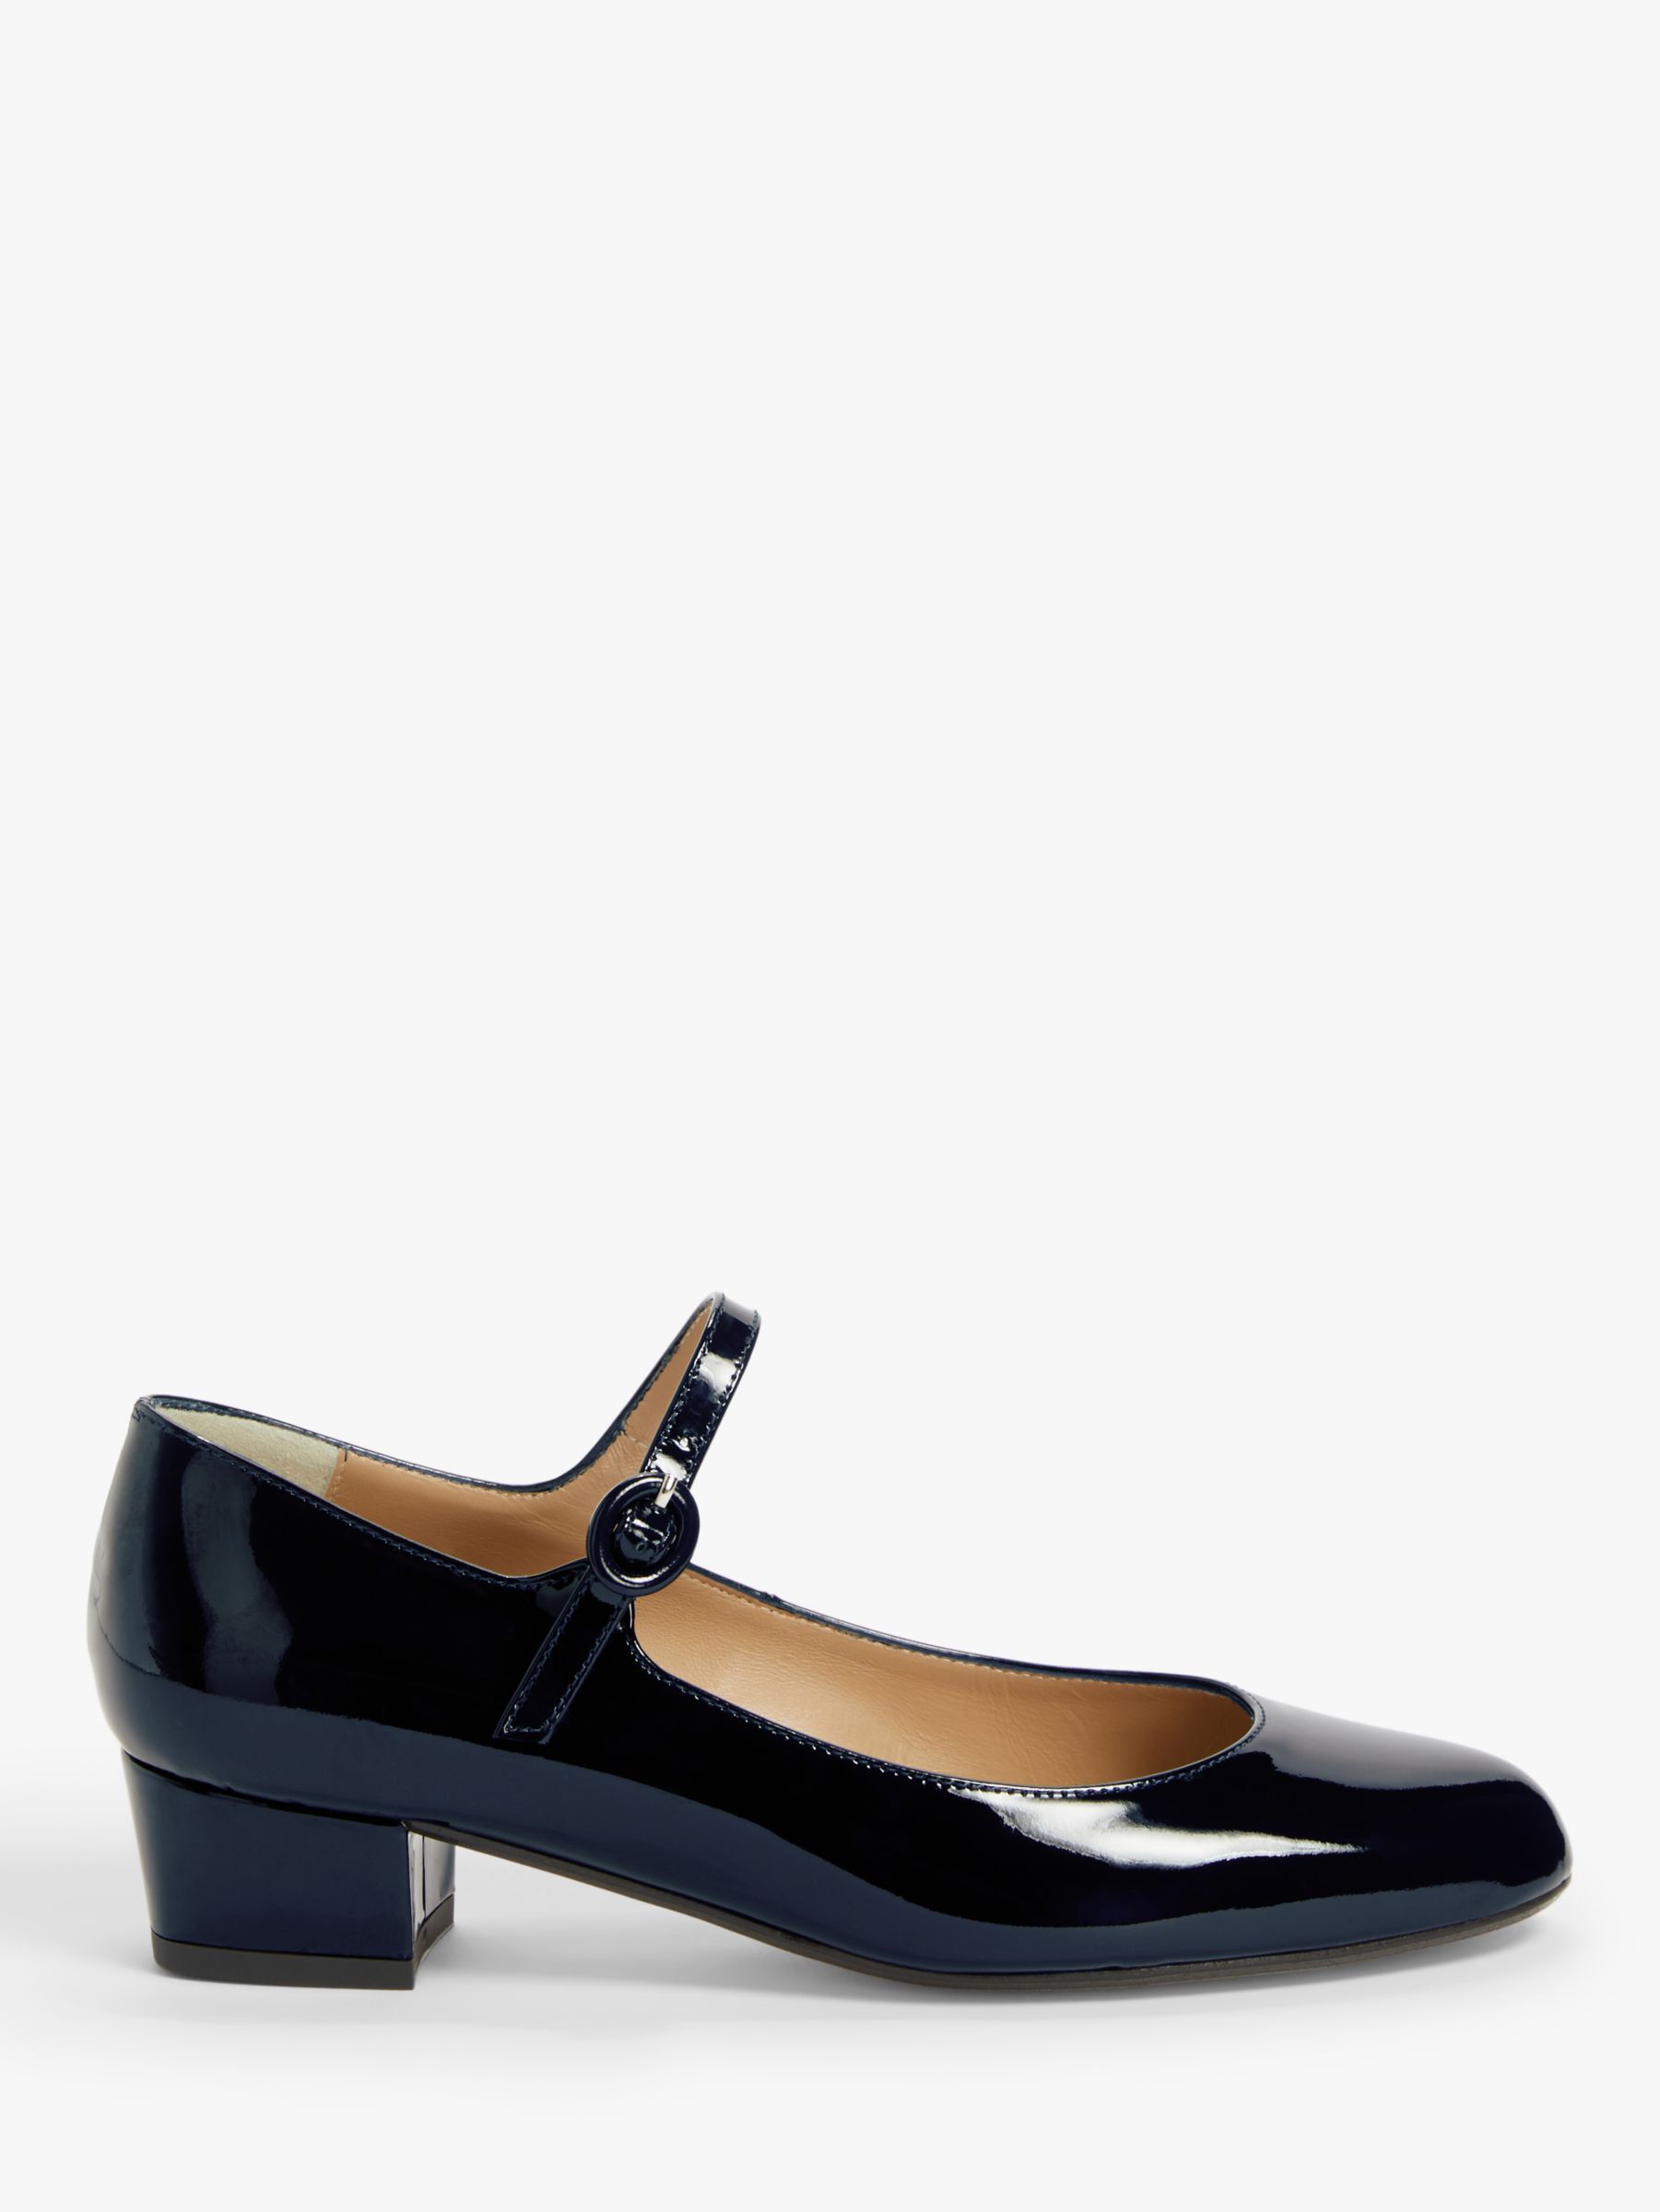 mary jane patent shoes